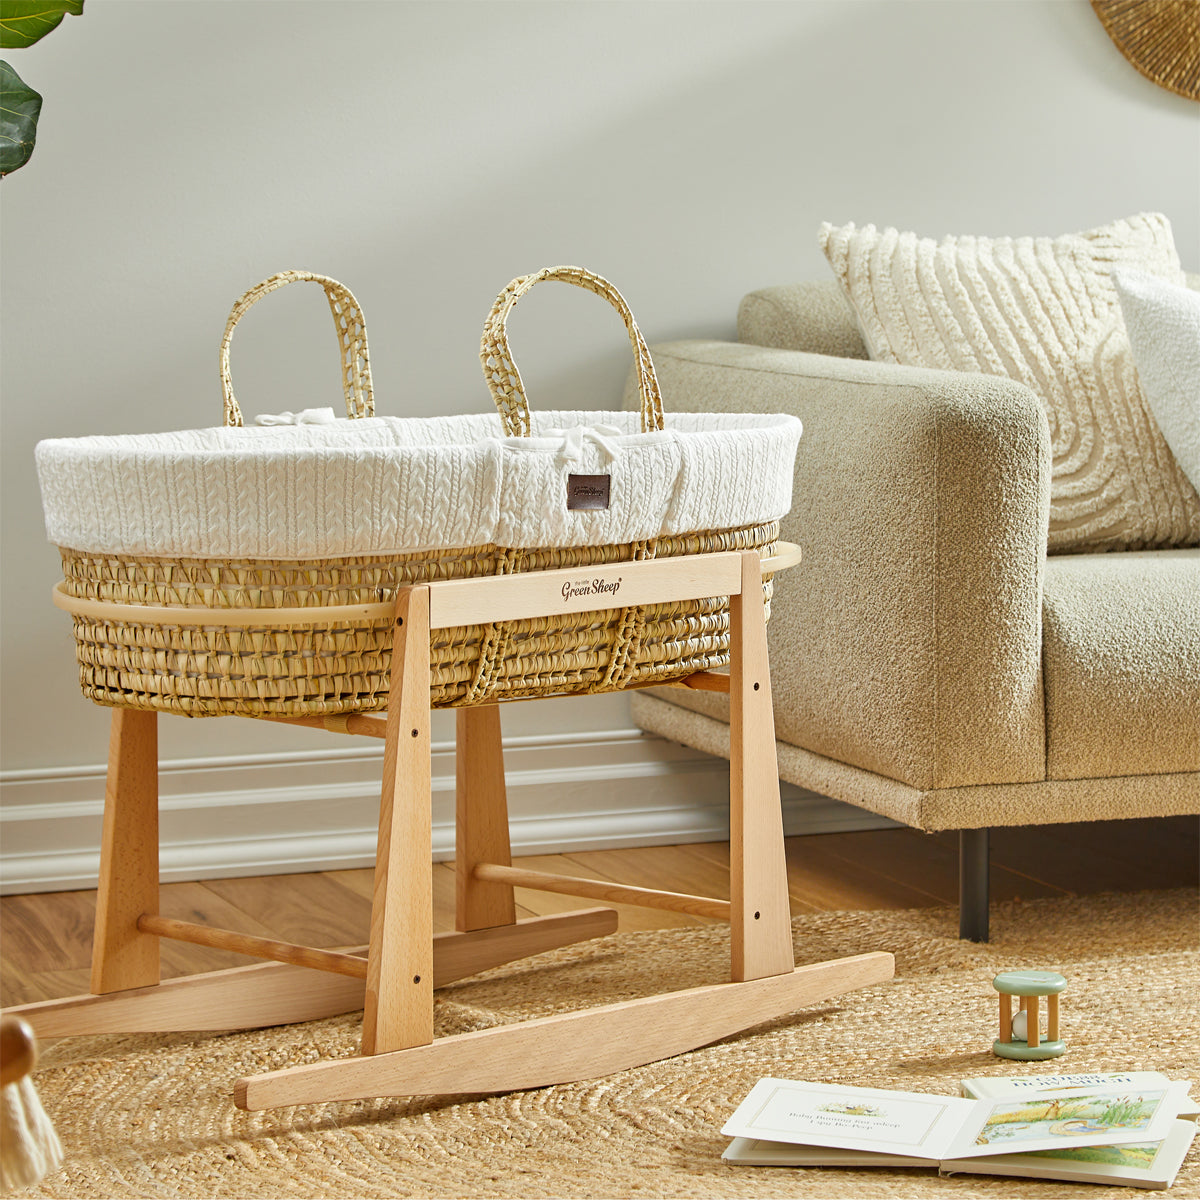 The Little Green Sheep Natural Knitted Moses Basket, Mattress & Stand- White